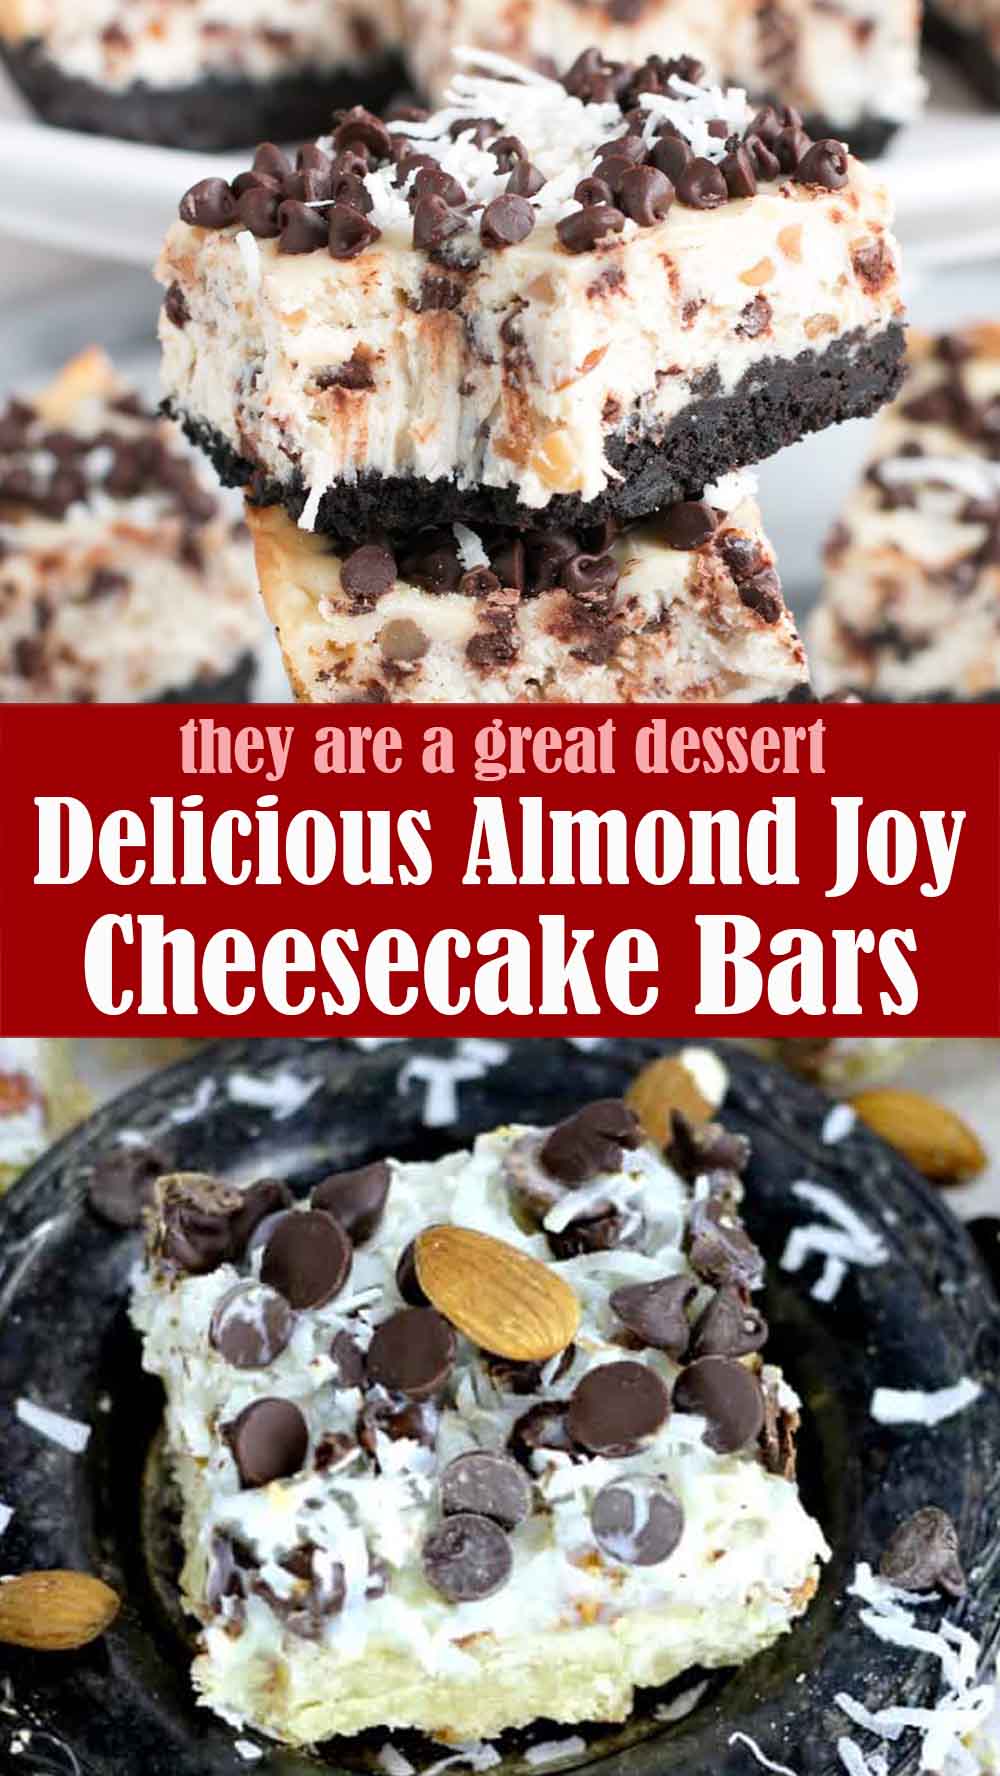 Quick and Delicious Almond Joy Cheesecake Bars